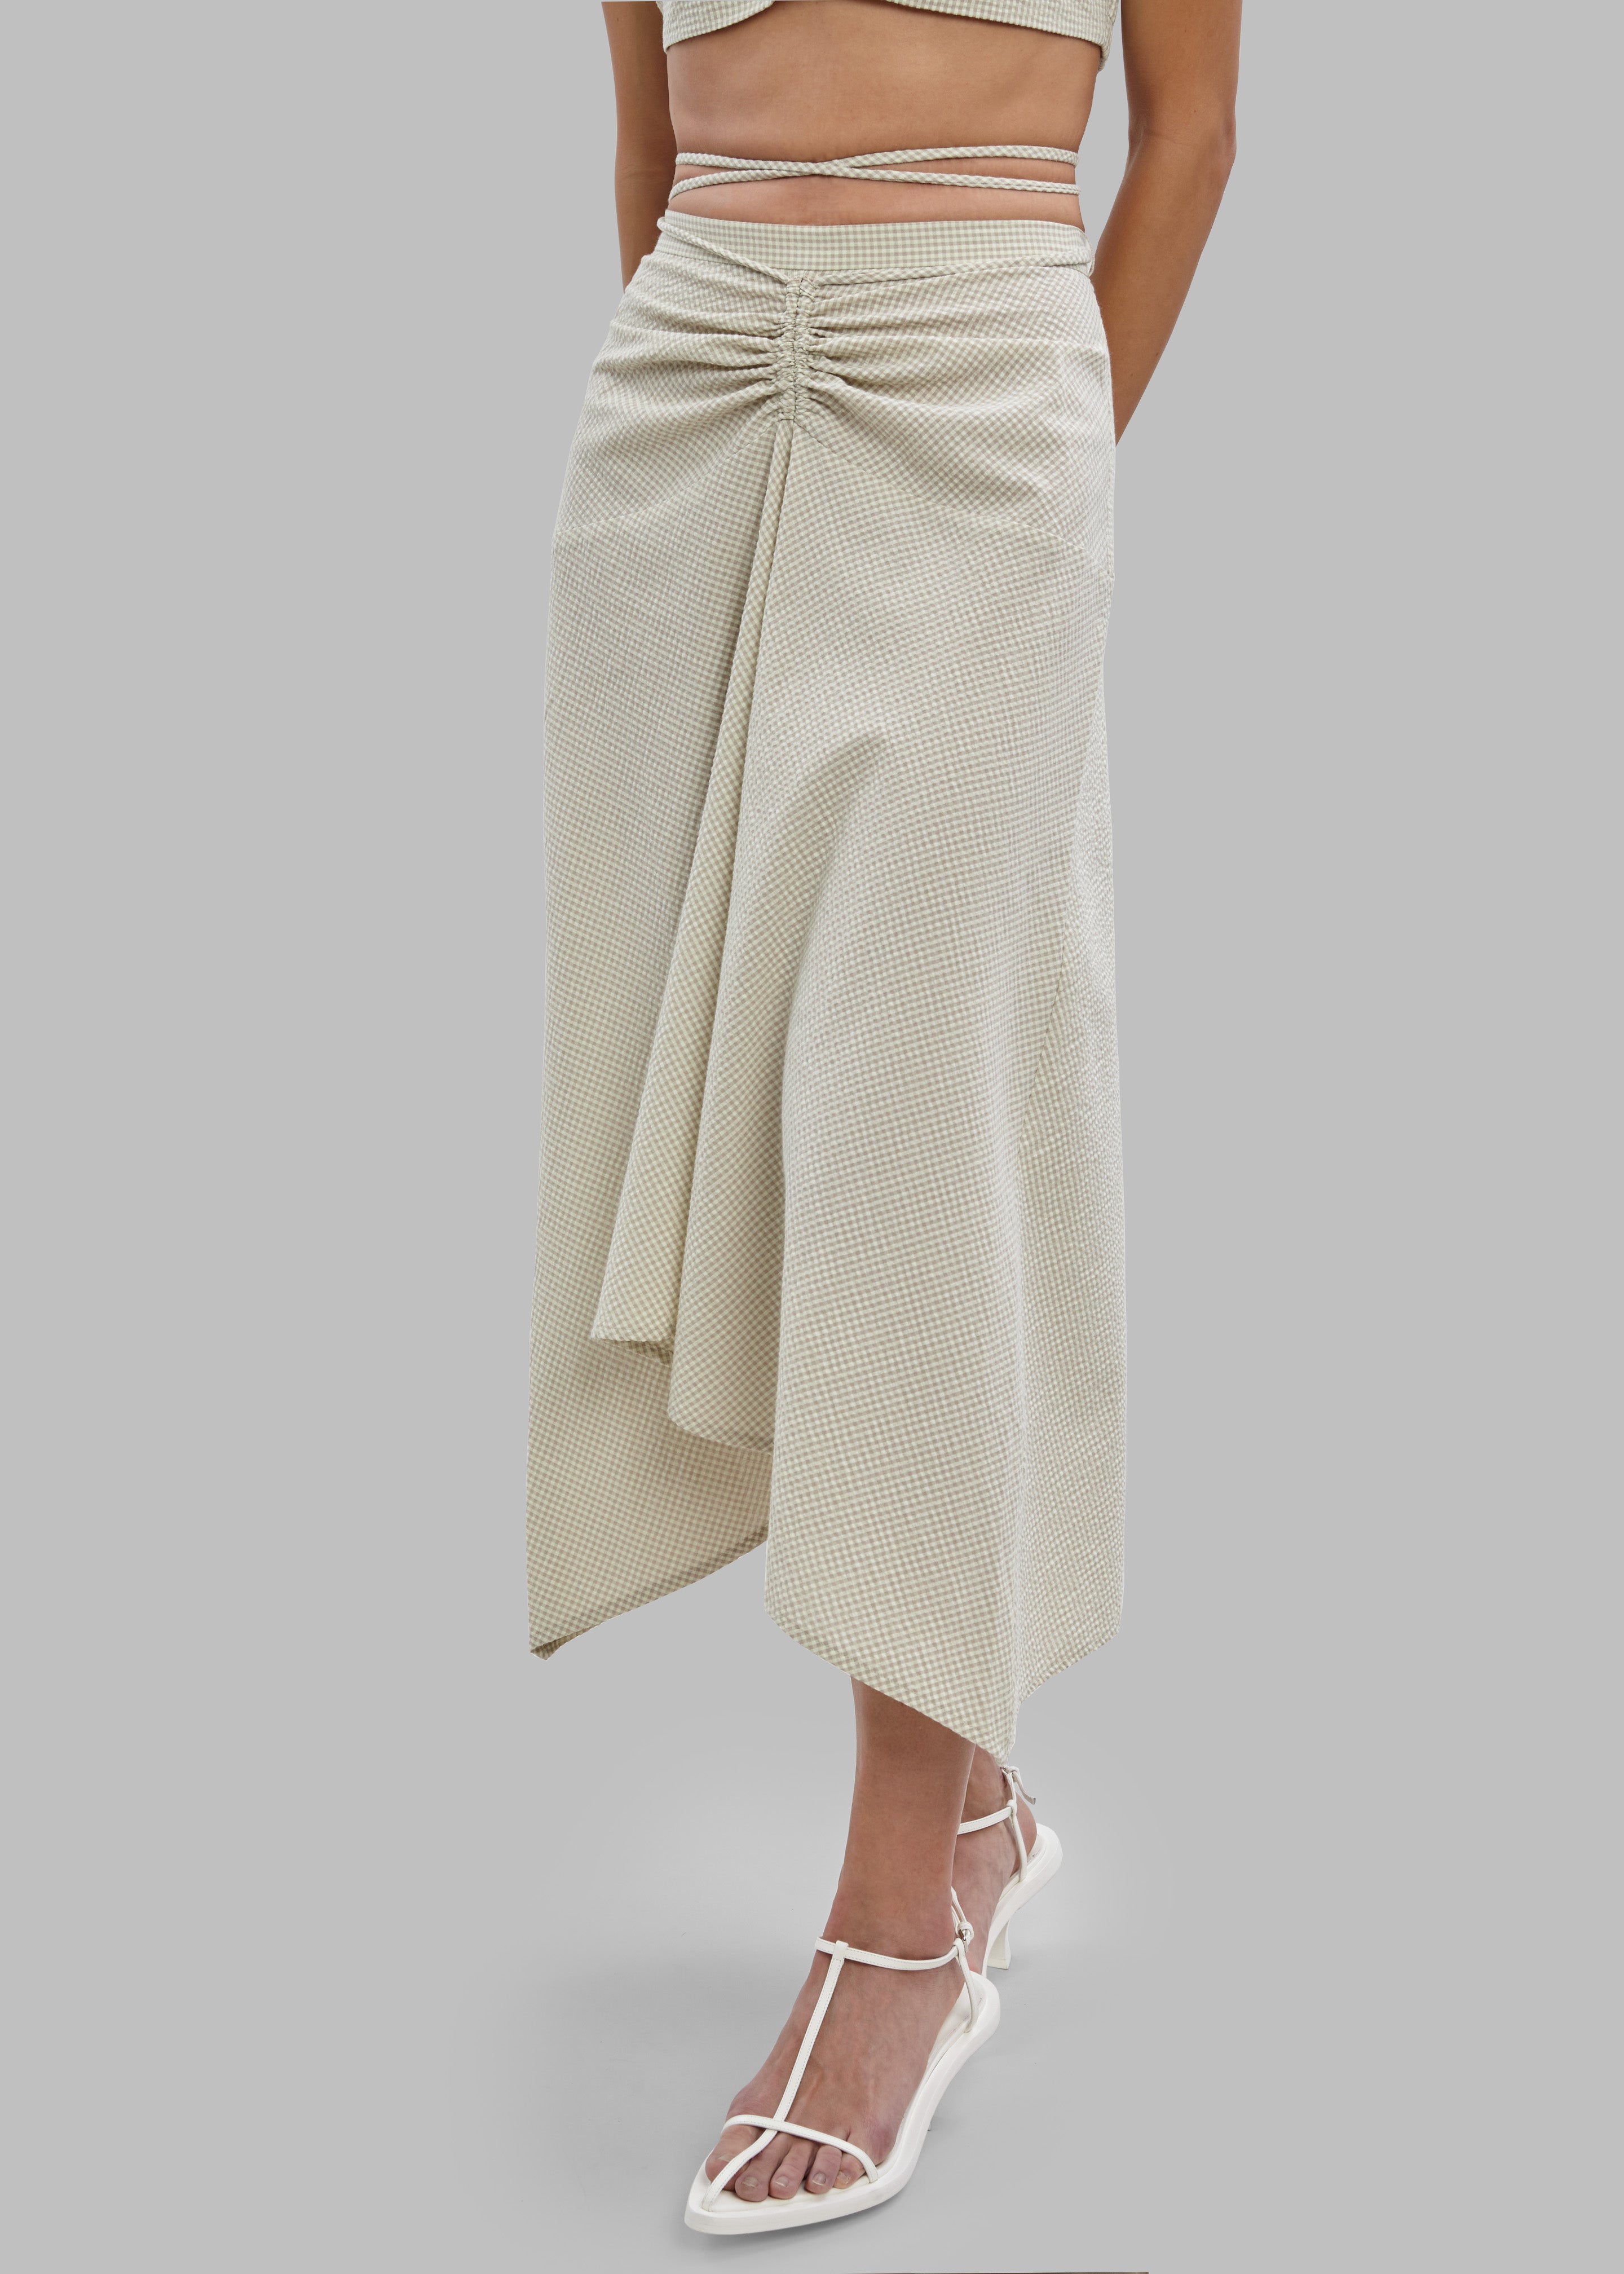 Cream Textured Ruched Front Midi Skirt, Womens Skirts